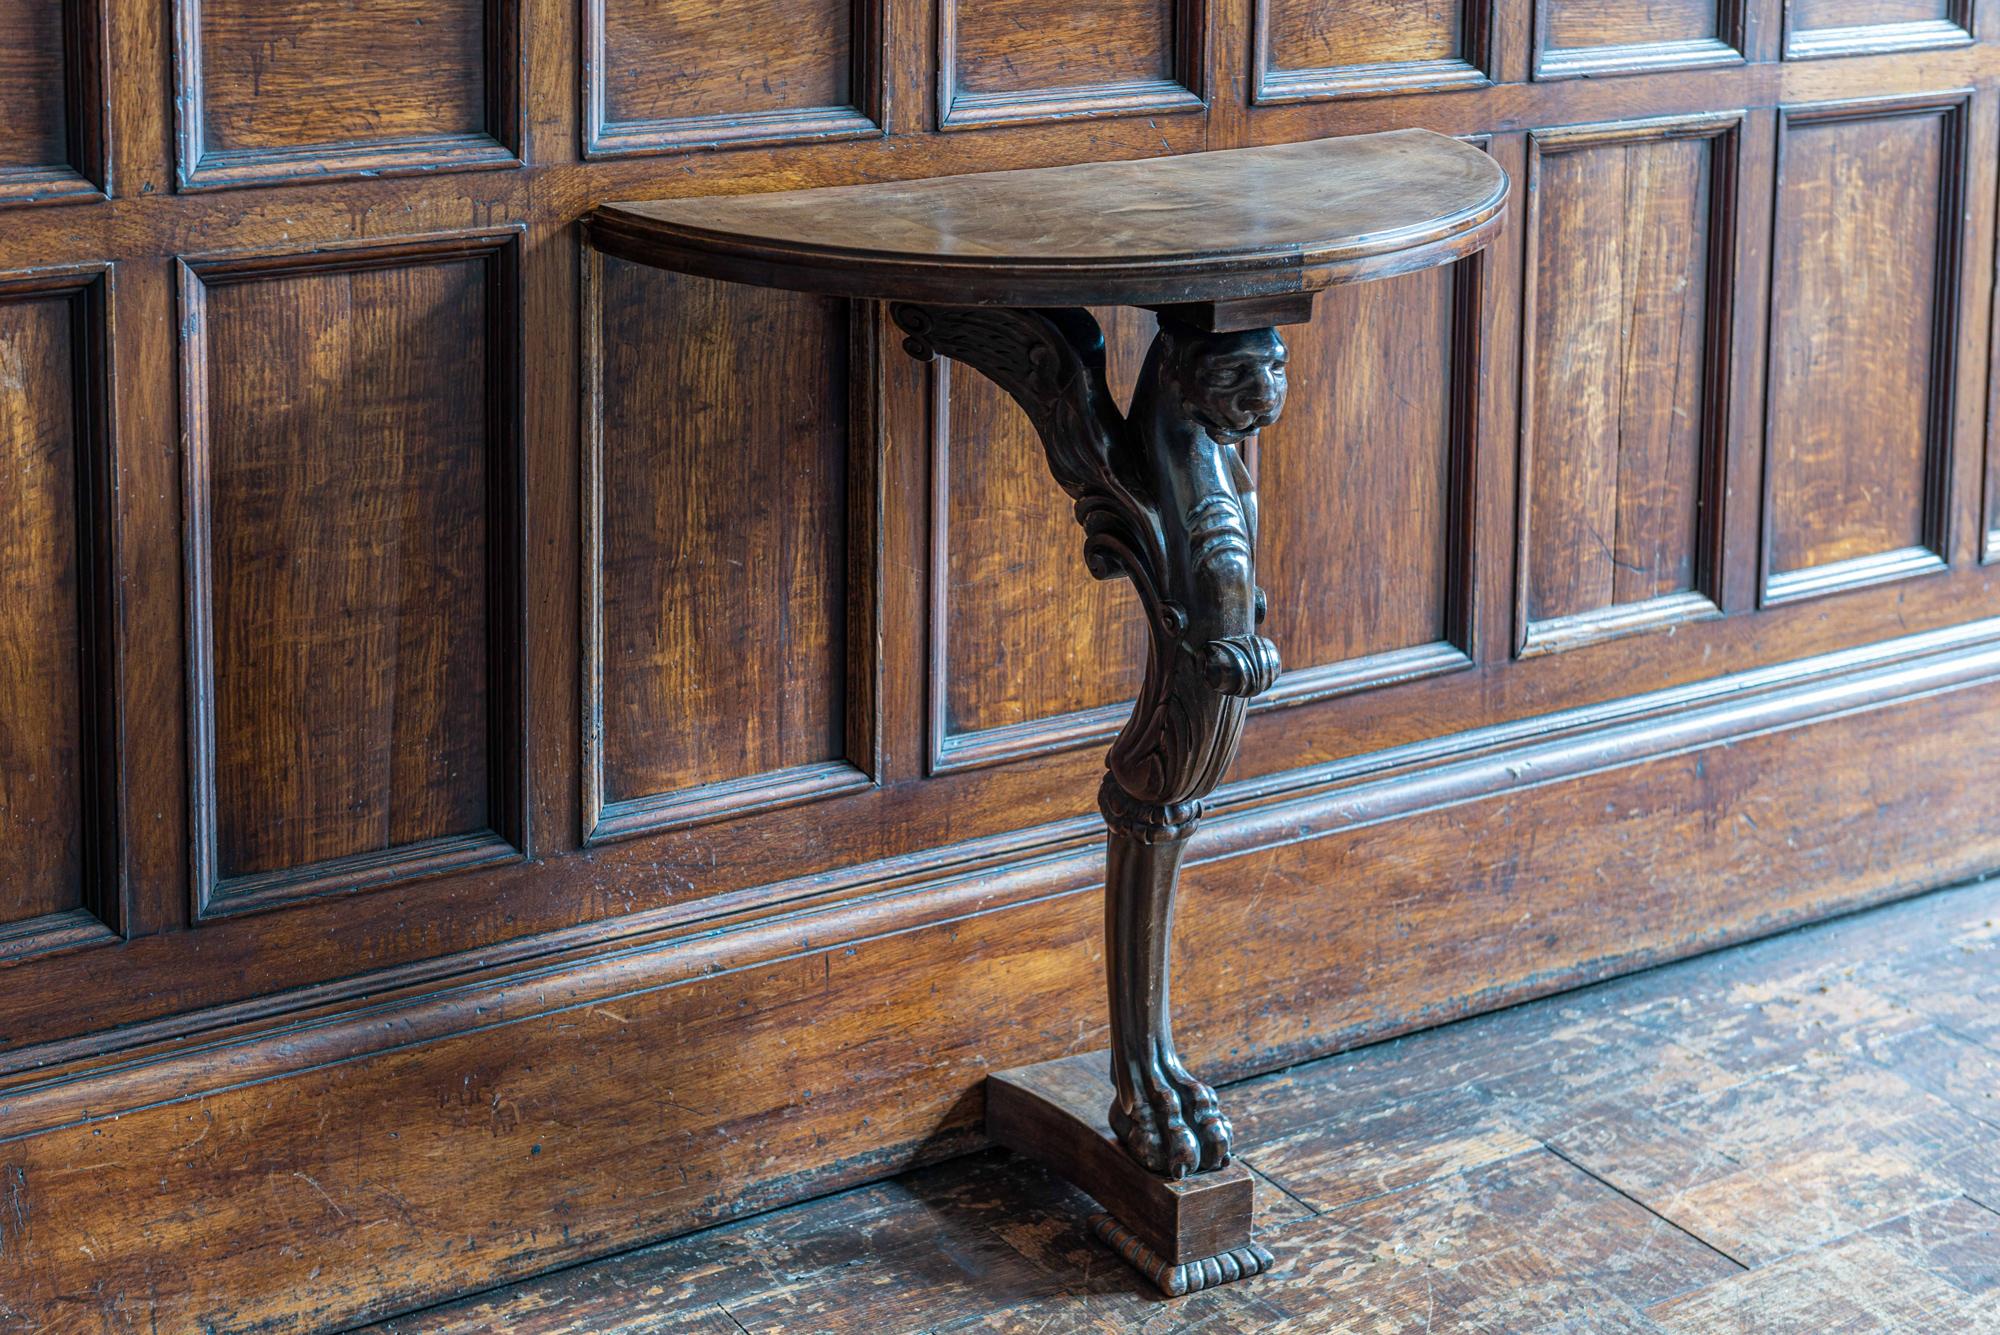 English carved winged lion demilune console table,
circa 1900.

A petite carved winged lion demilune wall-mounted console table.

Measures: 69 W x 31.5 D x 72 H cm.